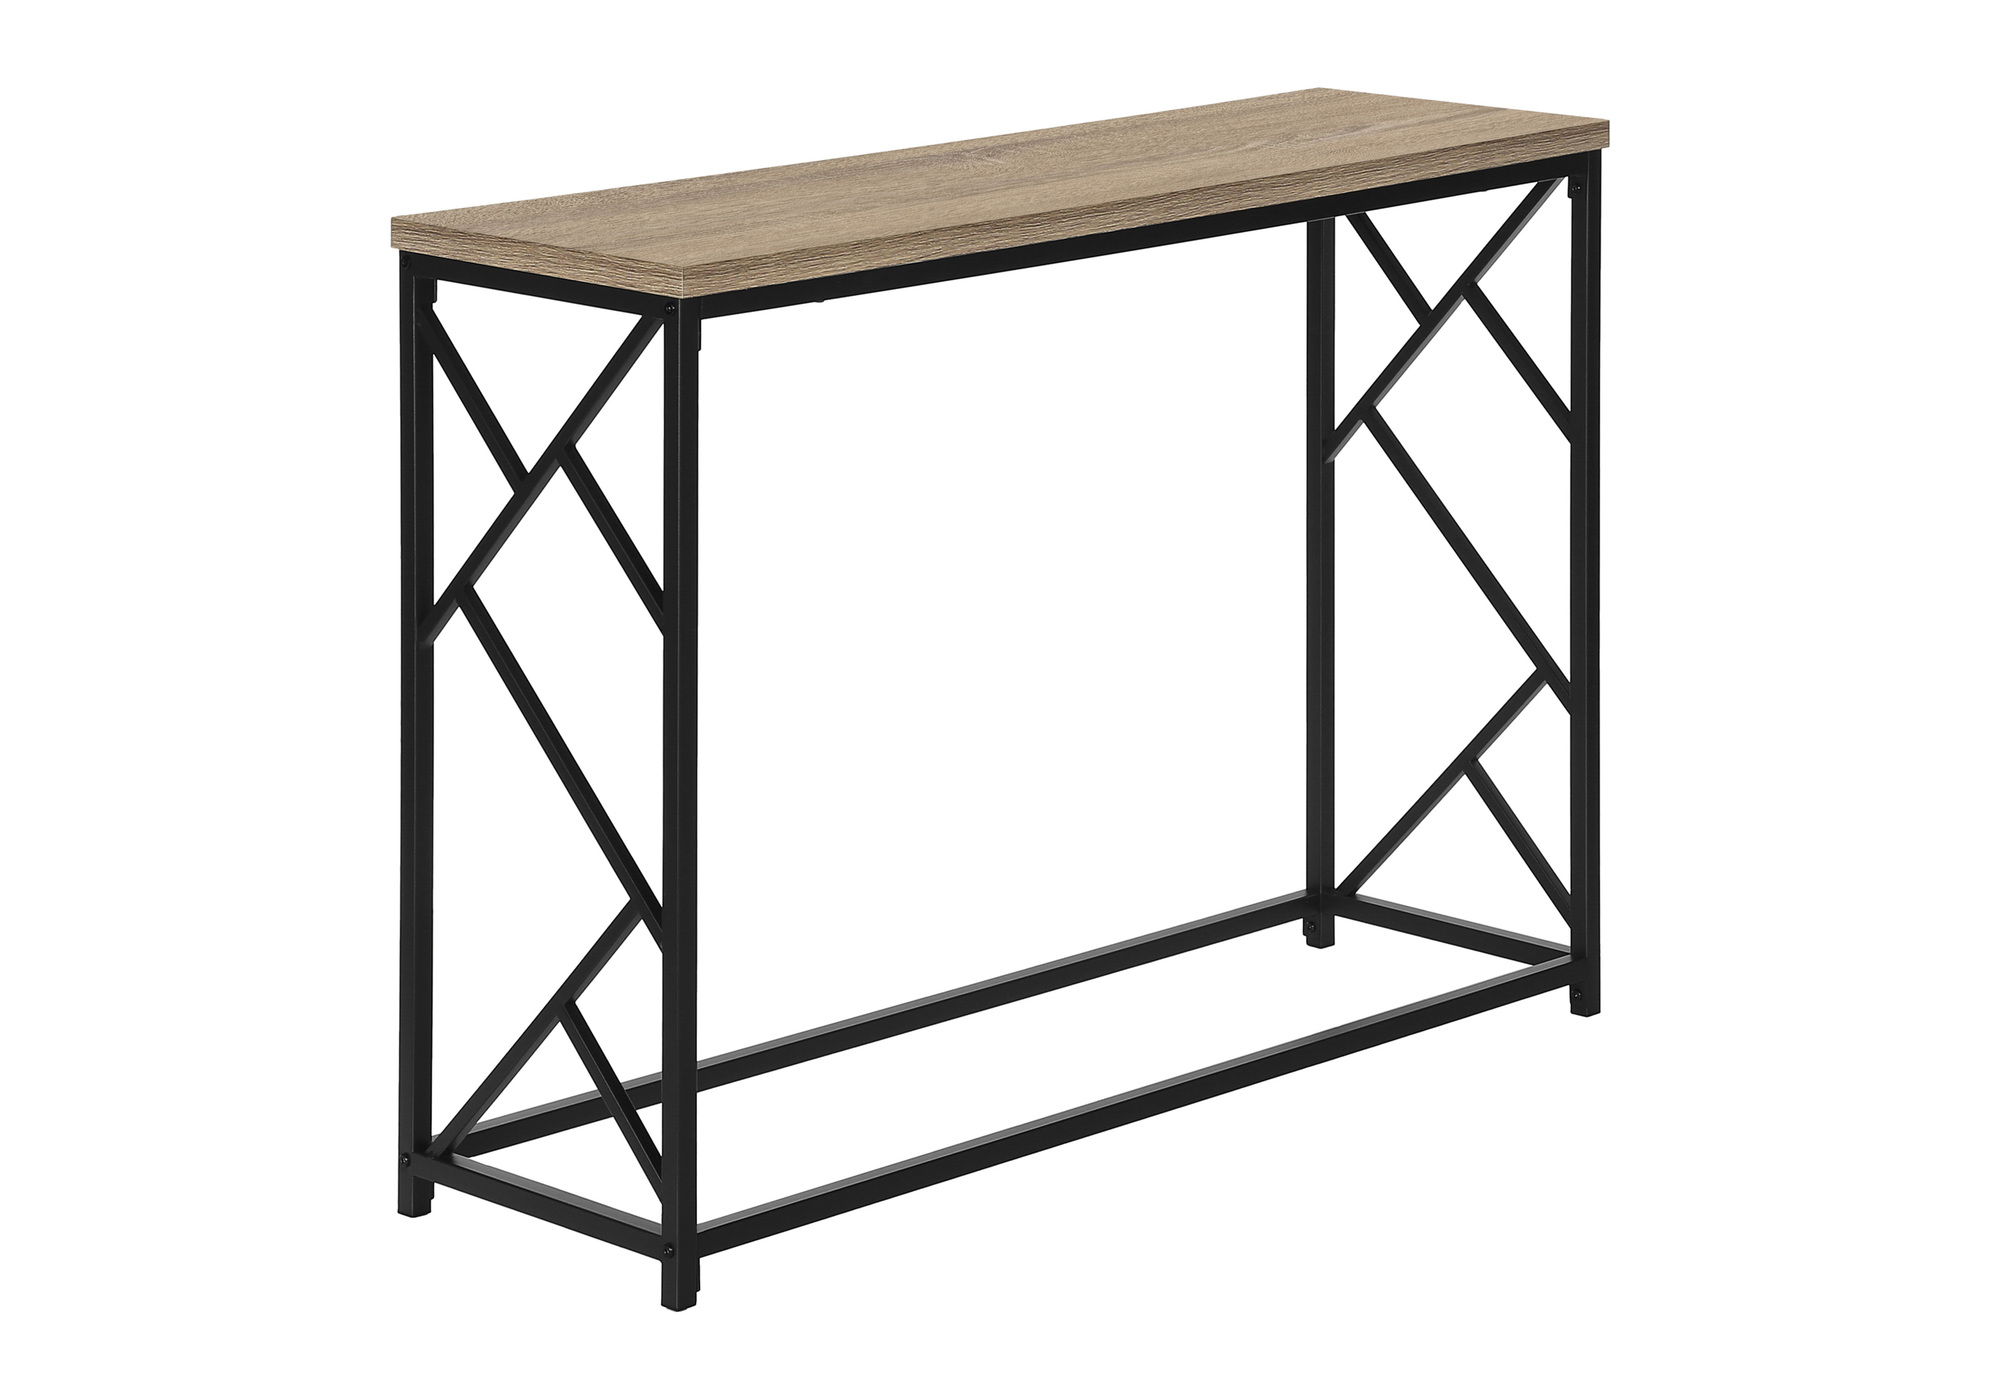 ACCENT TABLE - 44"L / TAUPE / BLACK METAL HALL CONSOLE